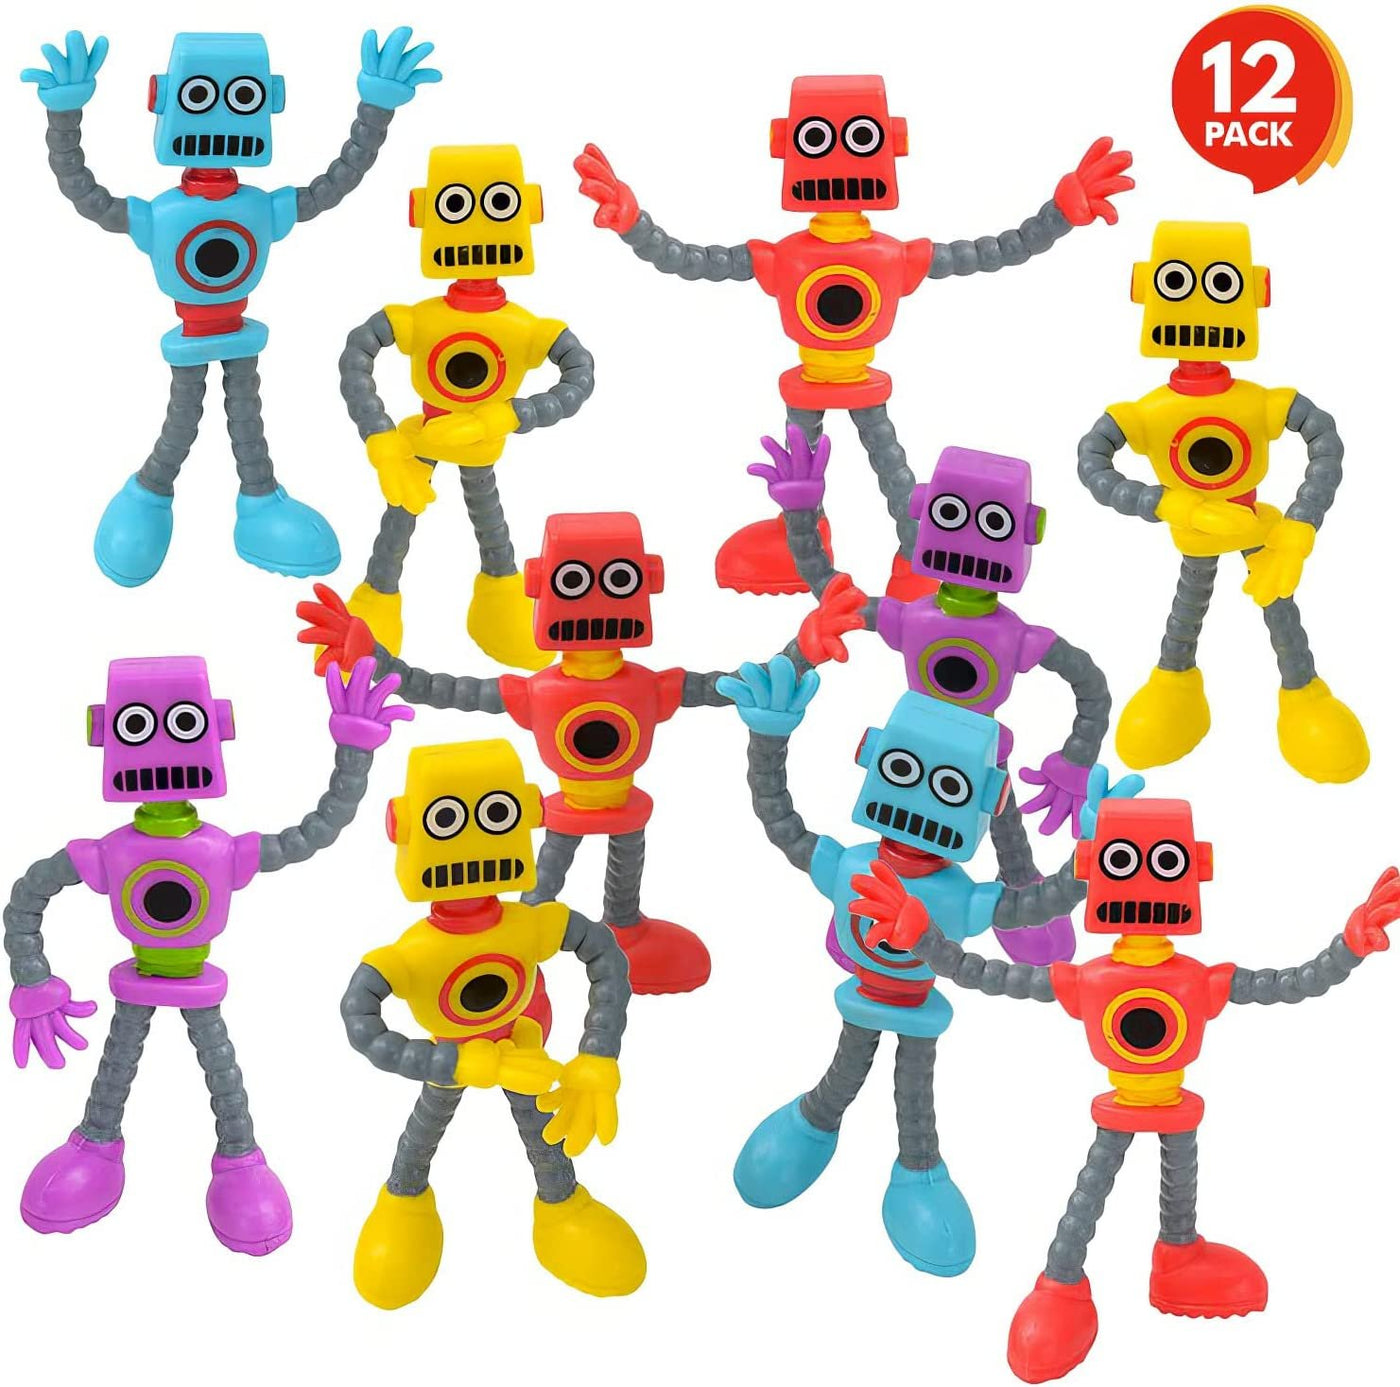 ArtCreativity Bendable Robot Figures, Set of 12 Flexible Men, Birthday Party Favors for Boys and Girls, Stress Relief Fidget Toys for Kids and Adults, Goody Bag Stuffers, Piñata Fillers